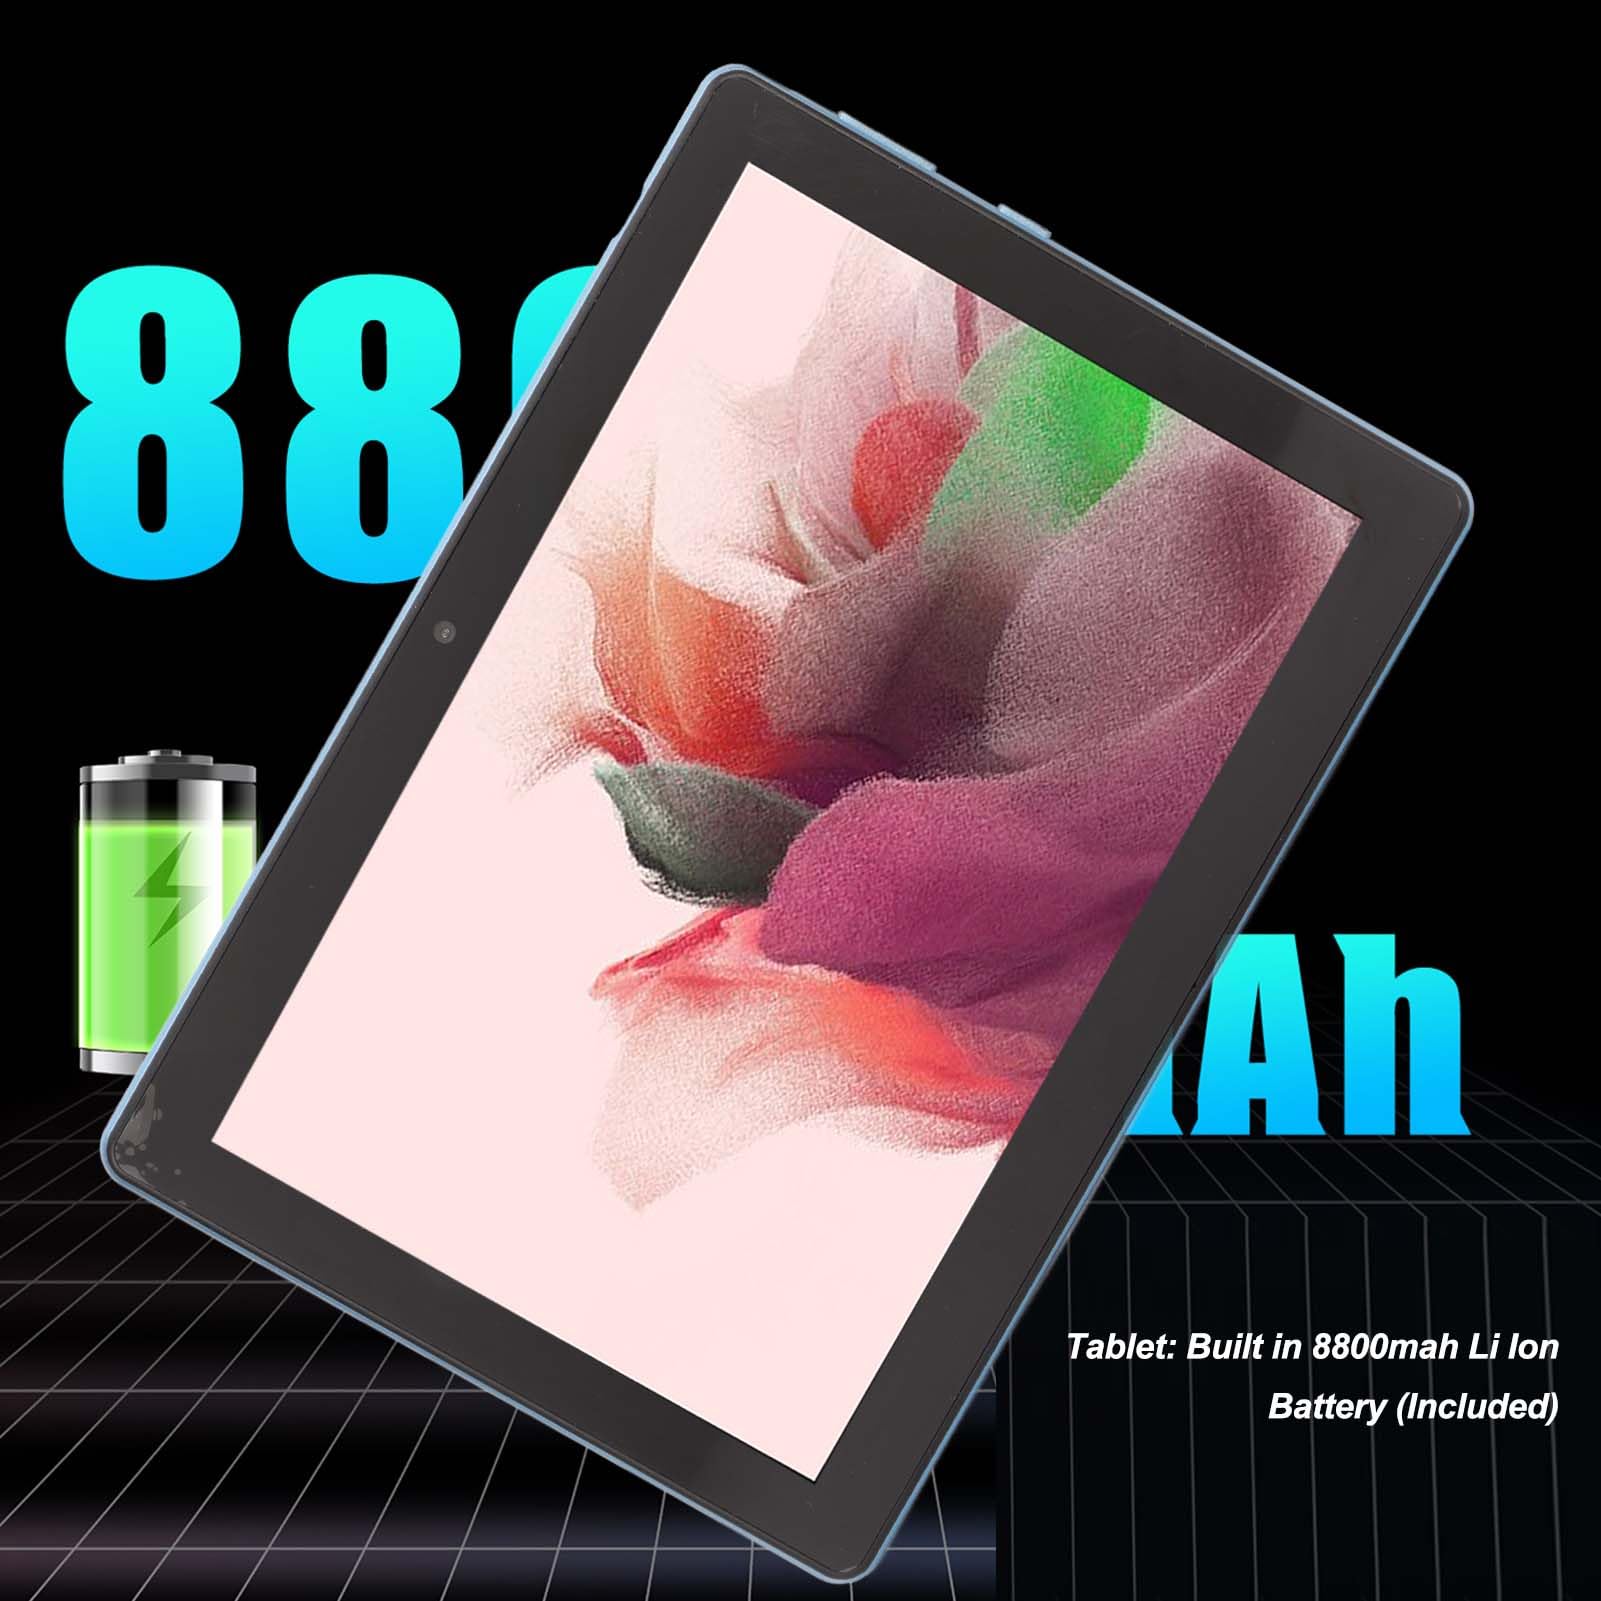 8 Inch Tablet Android11 Tablet, 6GB RAM 128GB ROM, IPS Touchscreen, Octa Core CPU, Dual Speaker, 4G LTE, 2.4/5G WiFi, BT5.0, 8MP+20MP Camera, 8800mah Battery (US Plug 100-240V)